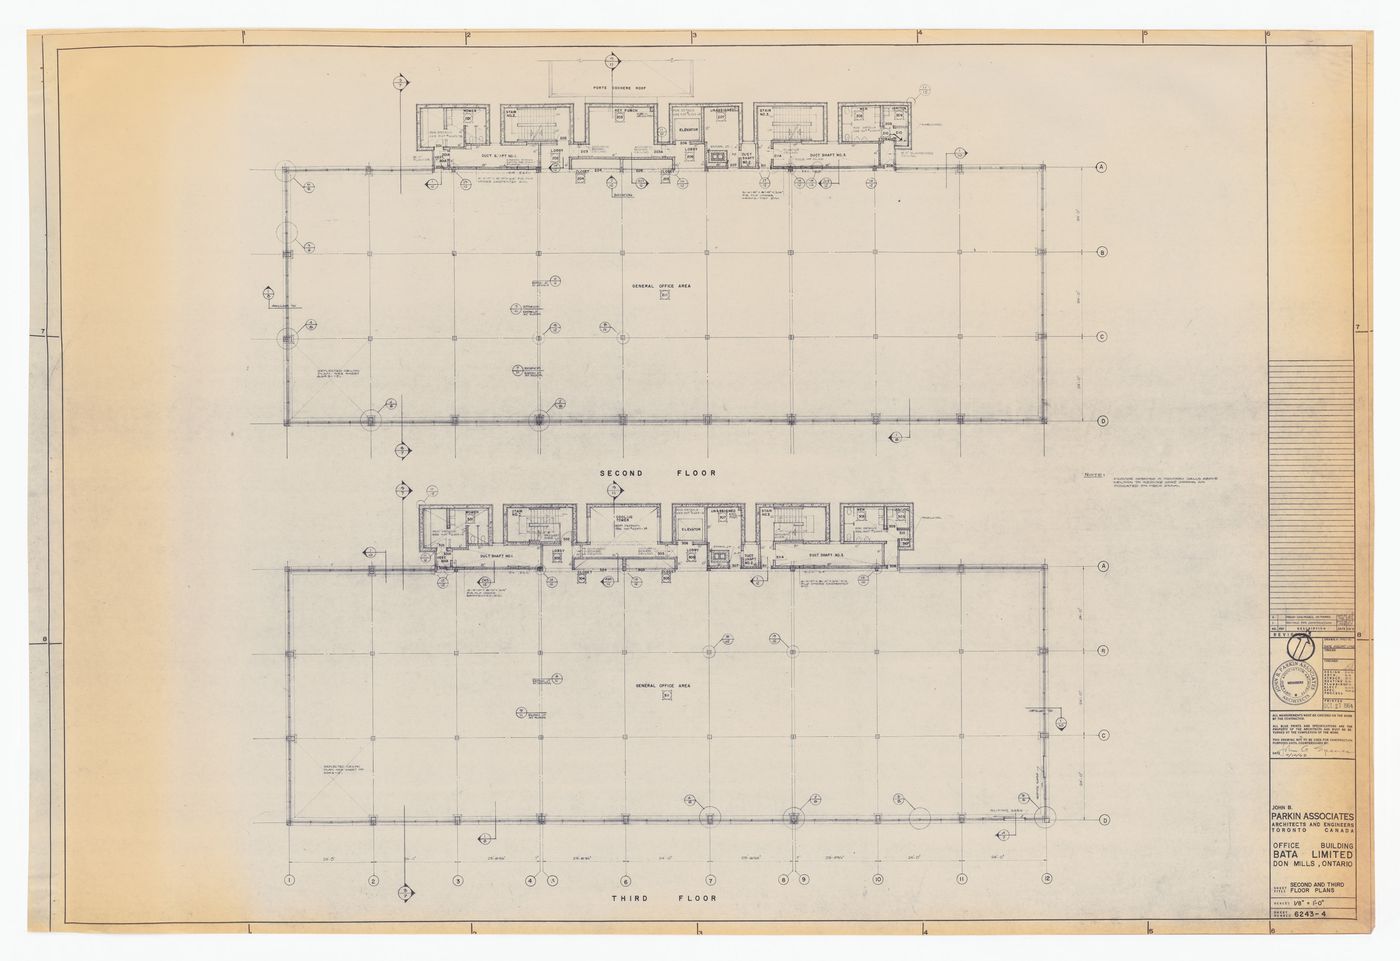 Second and third floor plans for Bata Limited Office Building, Don Mills, Ontario